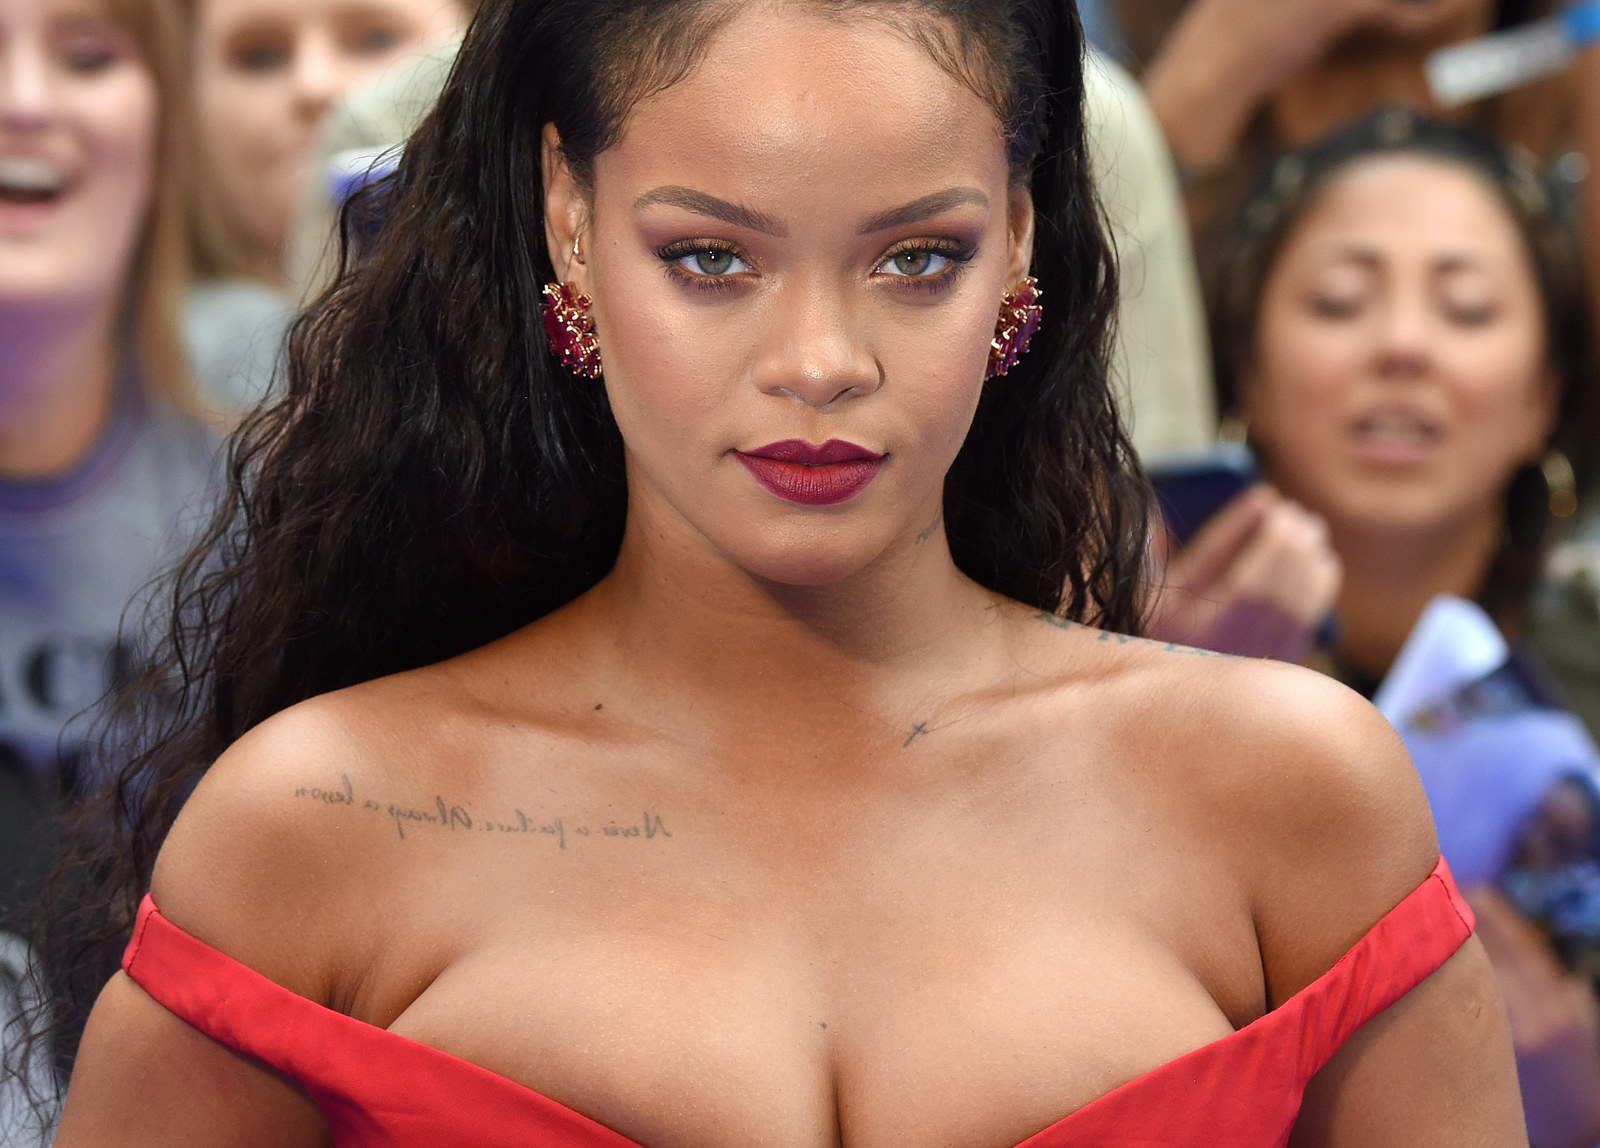 Why Rihannas Red Lipstick Line Is So Groundbreaking image picture pic